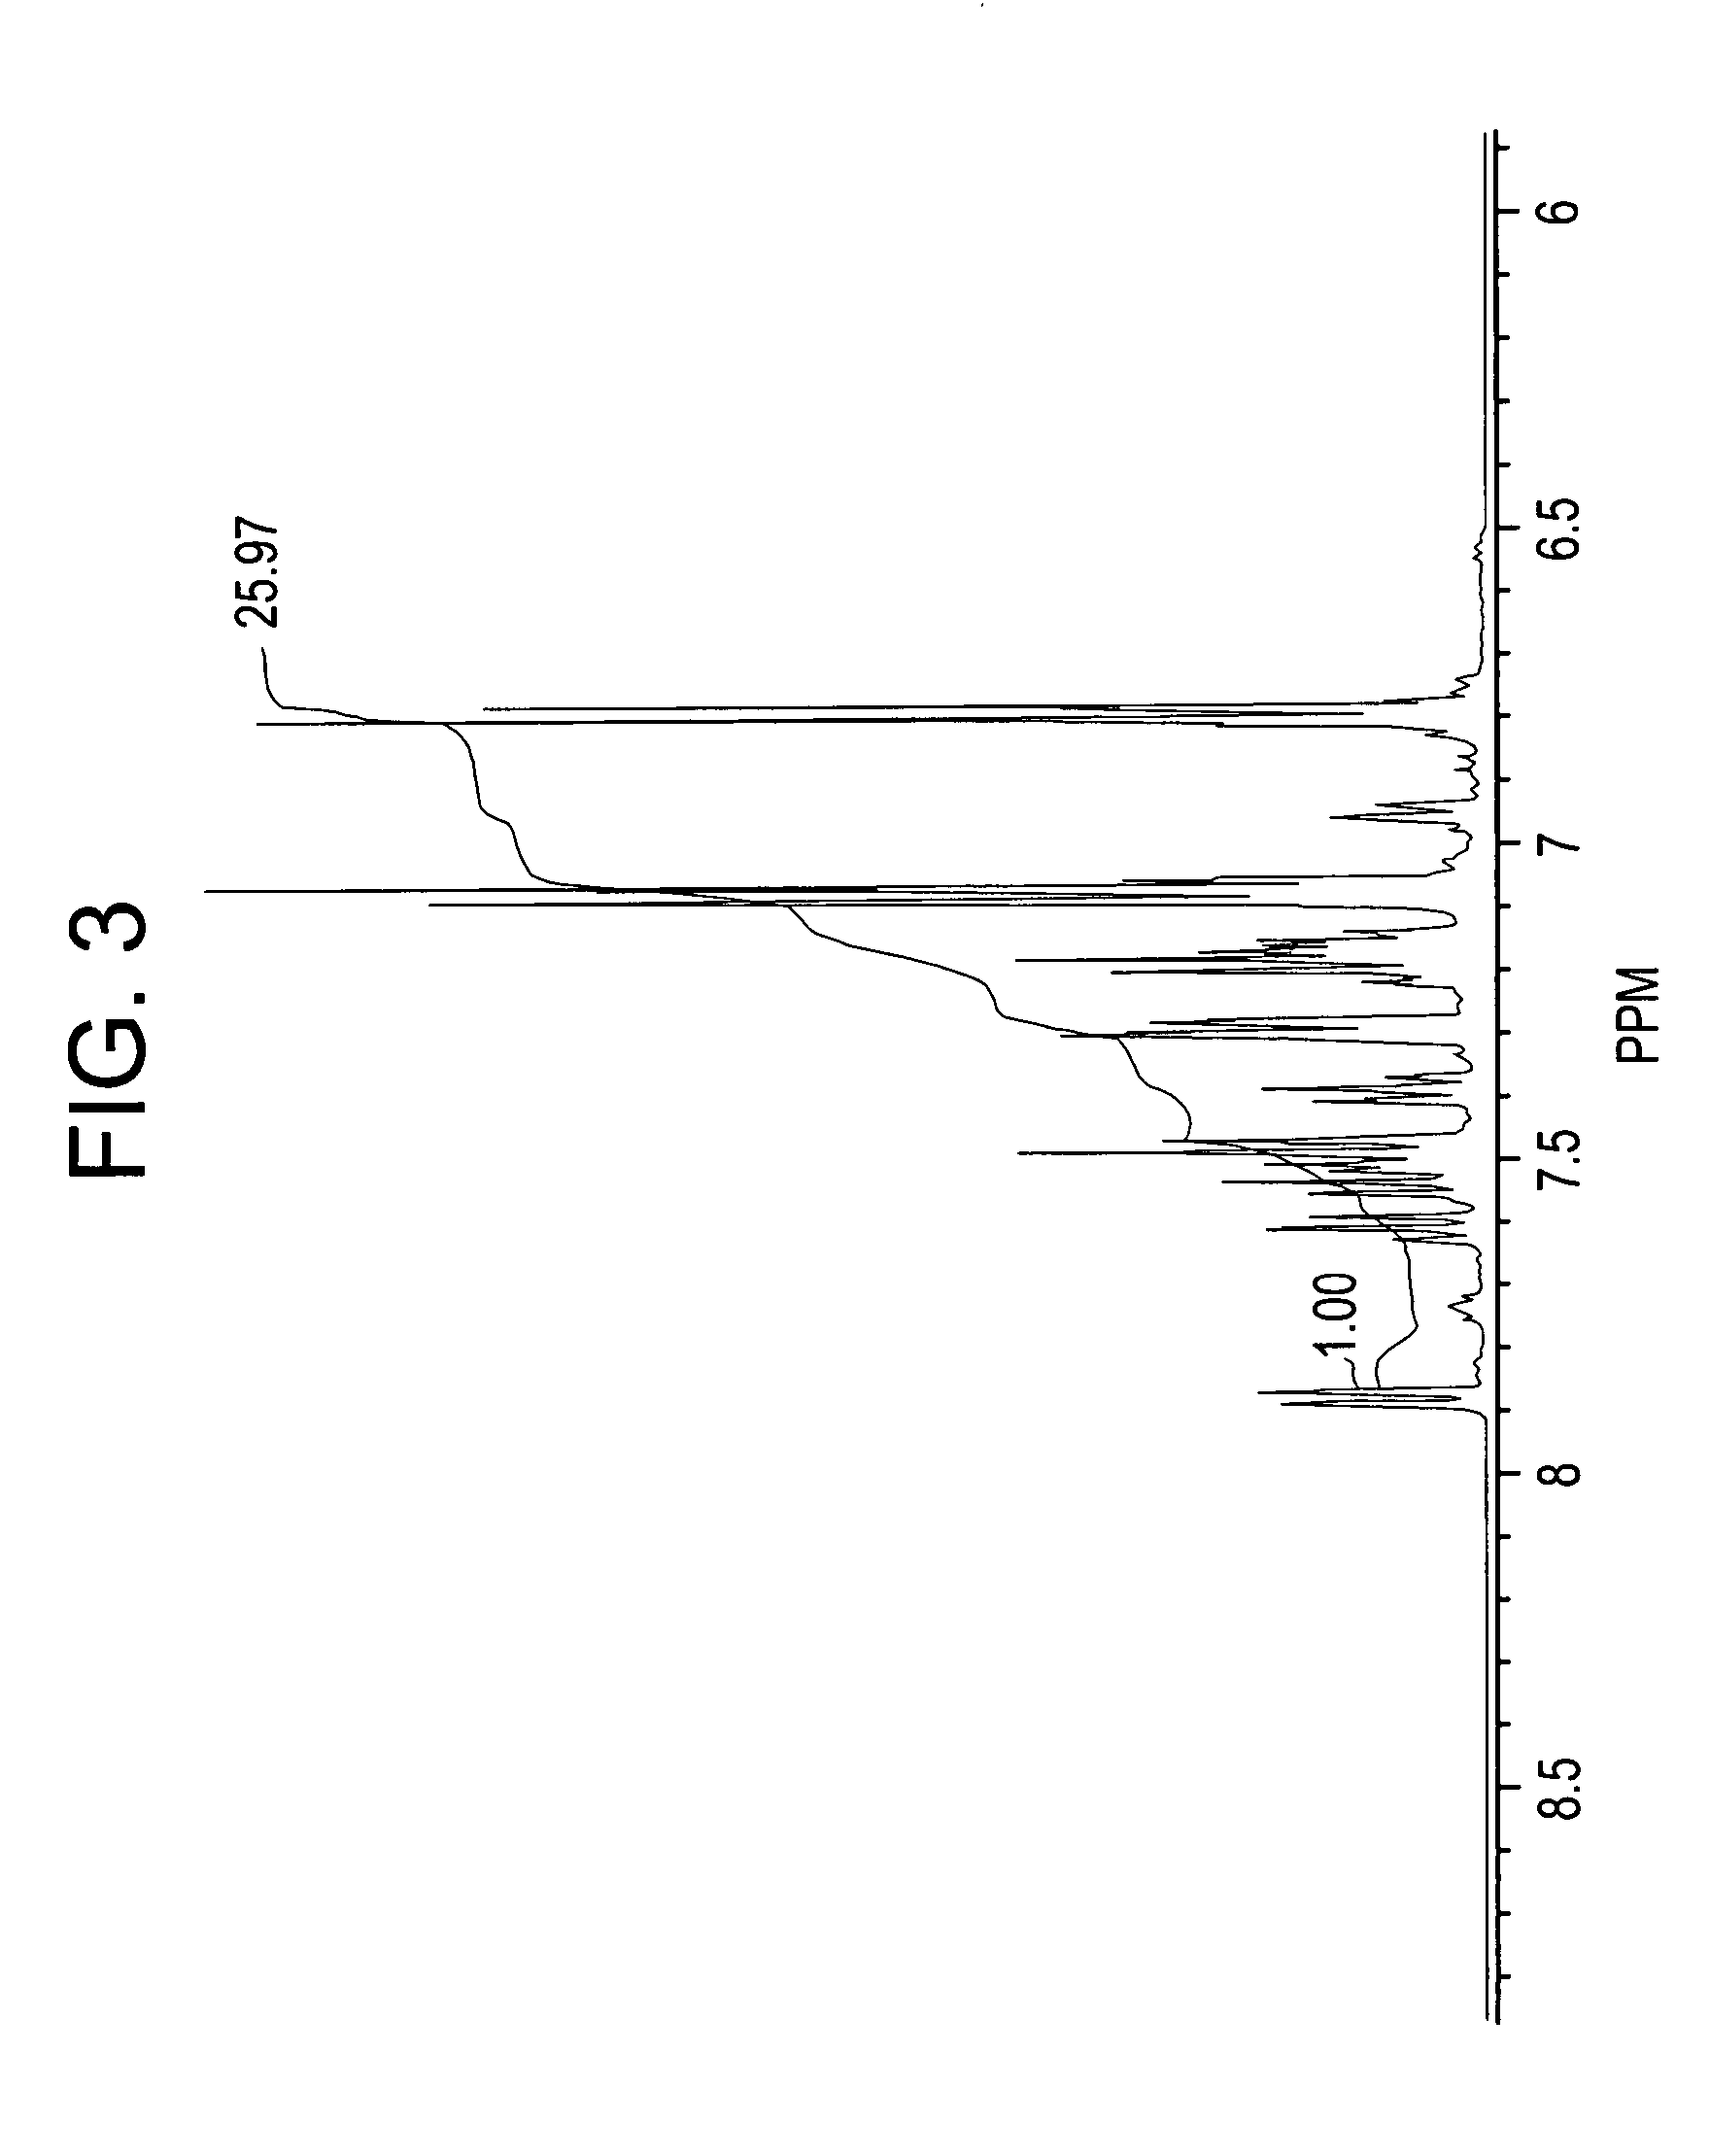 Methods for producing and purifying 2-hydrocarbyl-3,3-bis(4-hydroxyaryl)phthalimidine monomers and polycarbonates derived therefrom